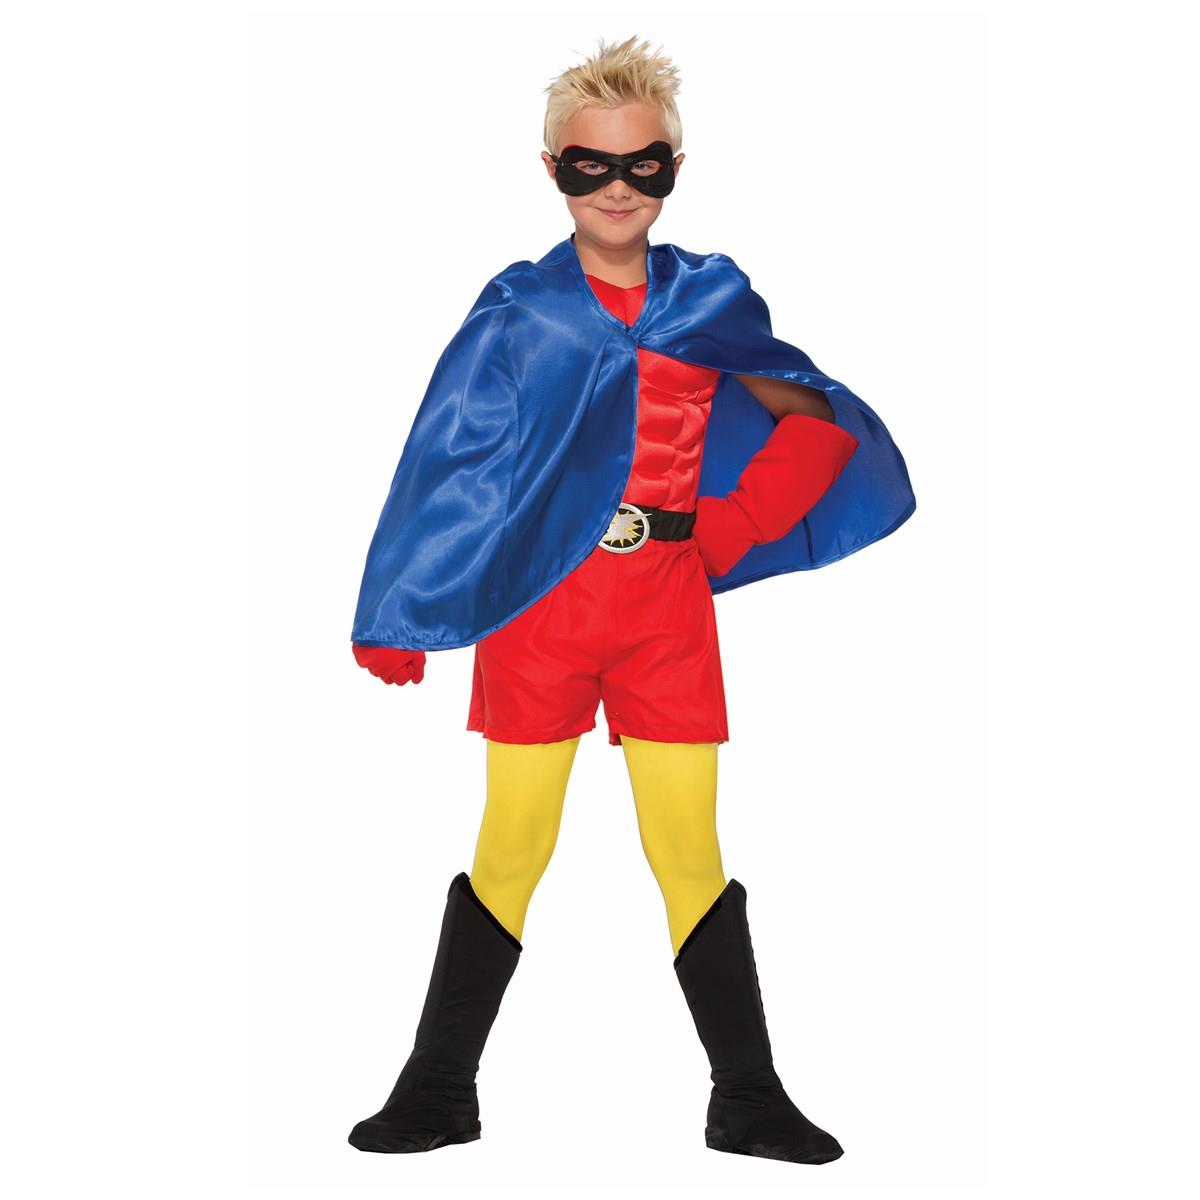 Picture of Buyseasons 283766 Halloween Childrens Super Hero Cape Blue - One Size